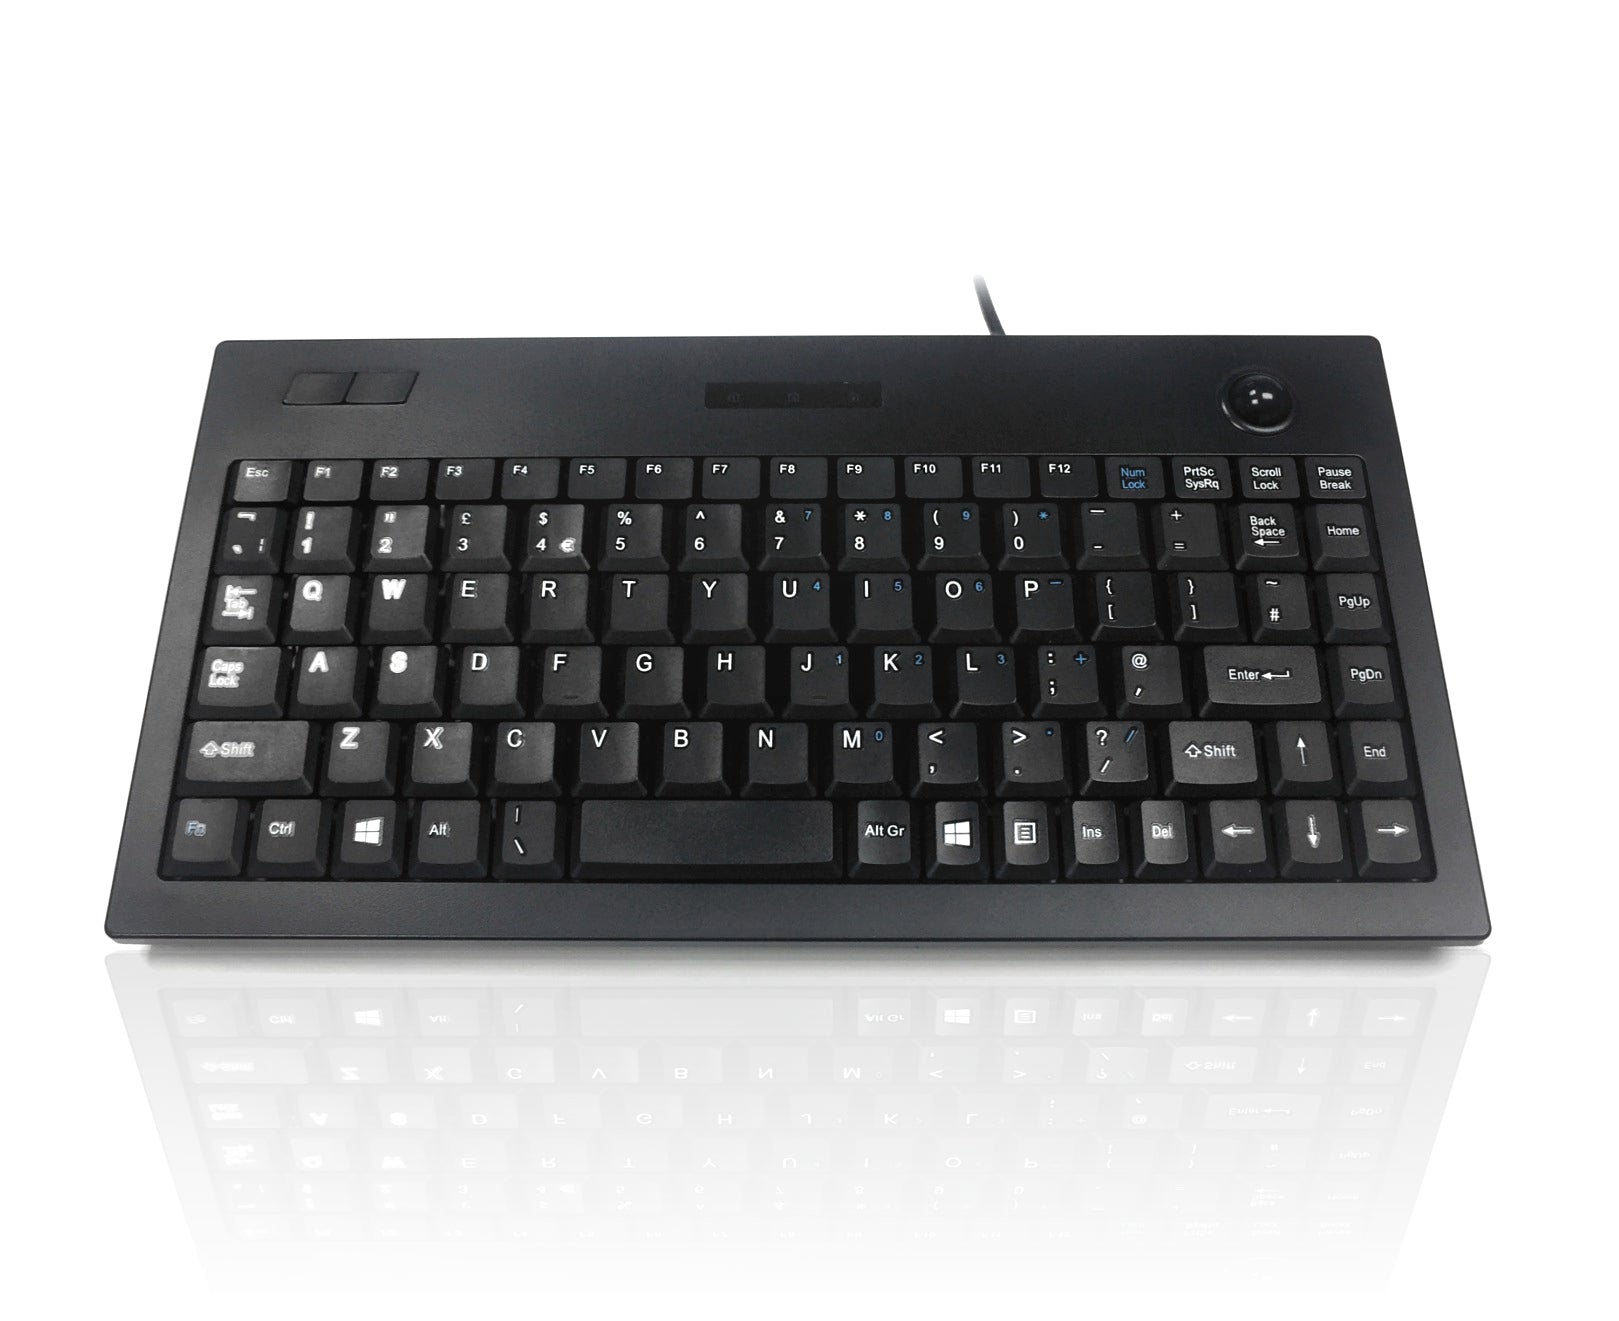 Accuratus 5005 - Professional Wired Mini Size Keyboard with Optical Trackball and Left / Right Mouse Buttons